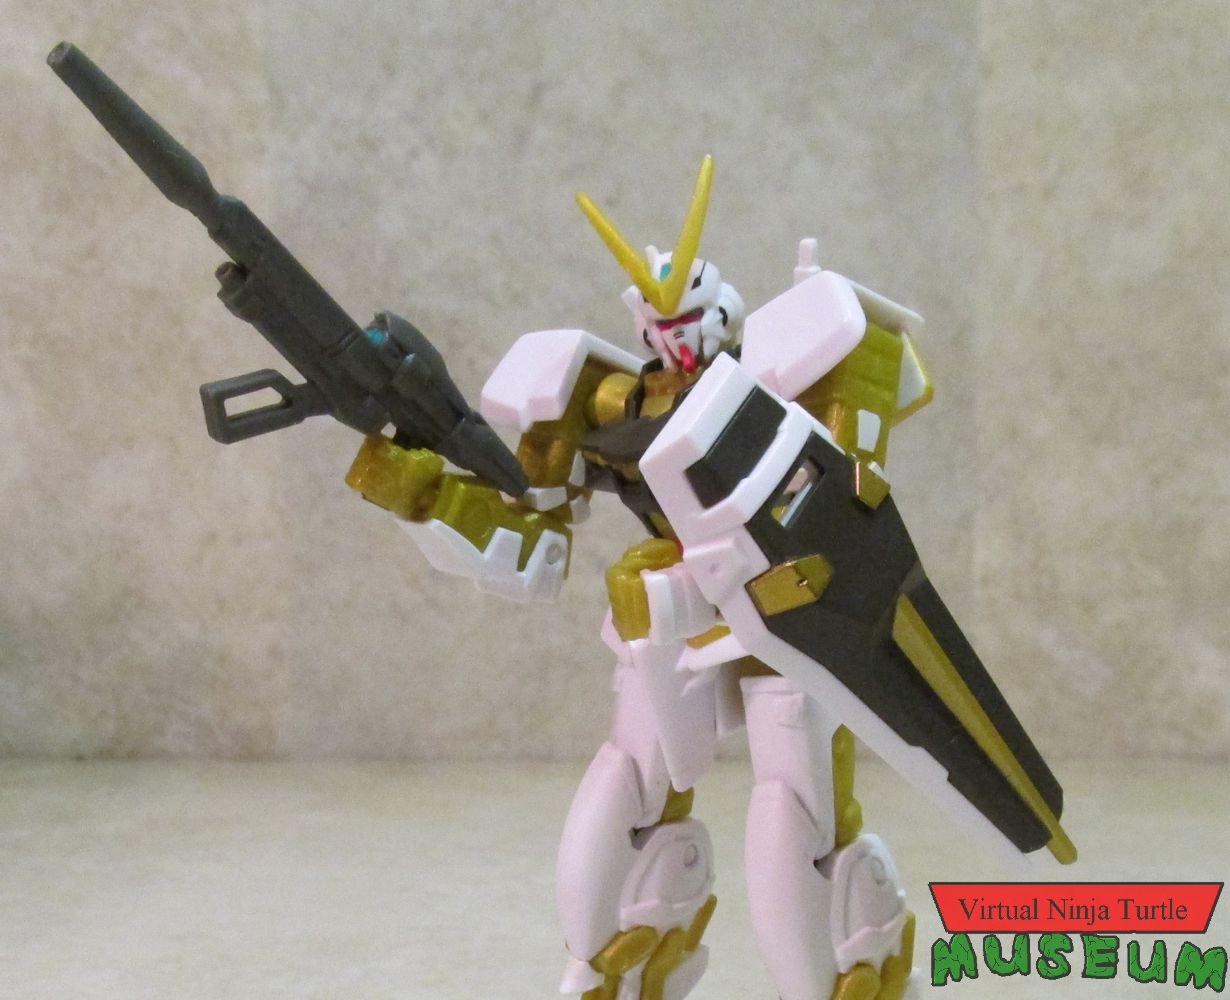 Infinity Gundam Gold Astray with shield and rifle